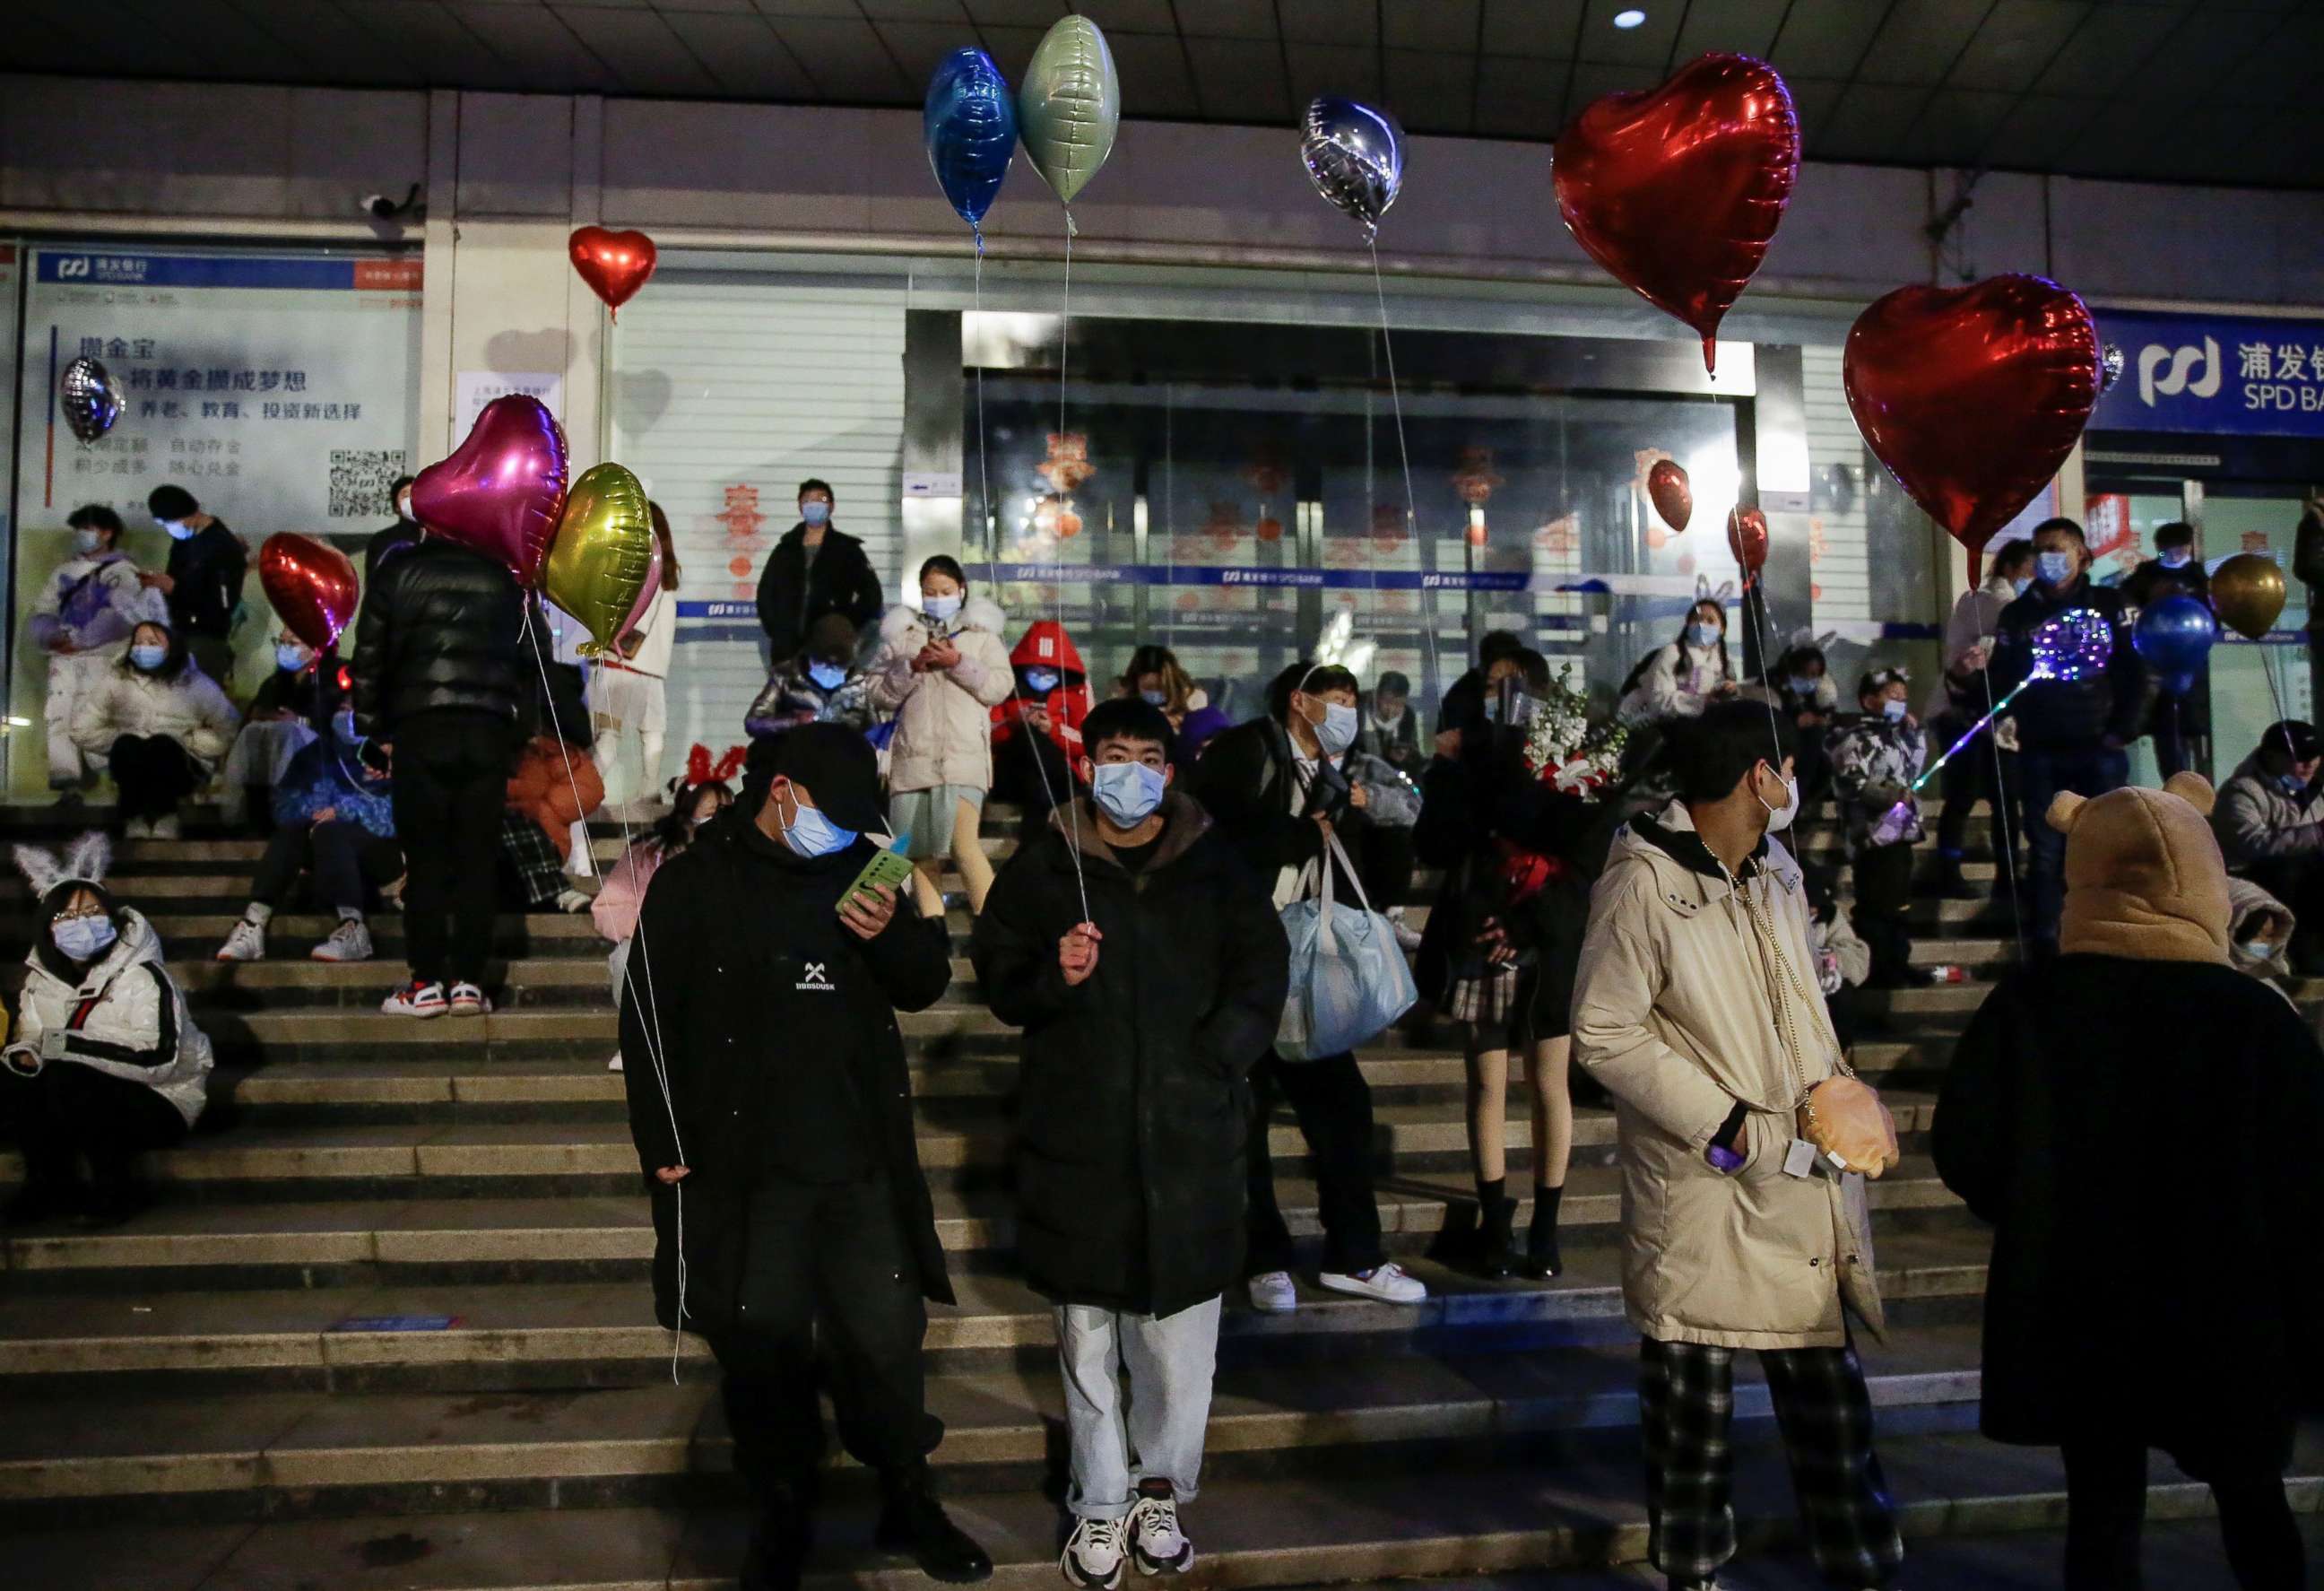 PHOTO: People hold balloons as they gather to celebrate the arrival of the new year during the coronavirus disease (COVID-19) outbreak in Wuhan, China, Dec. 31, 2020.